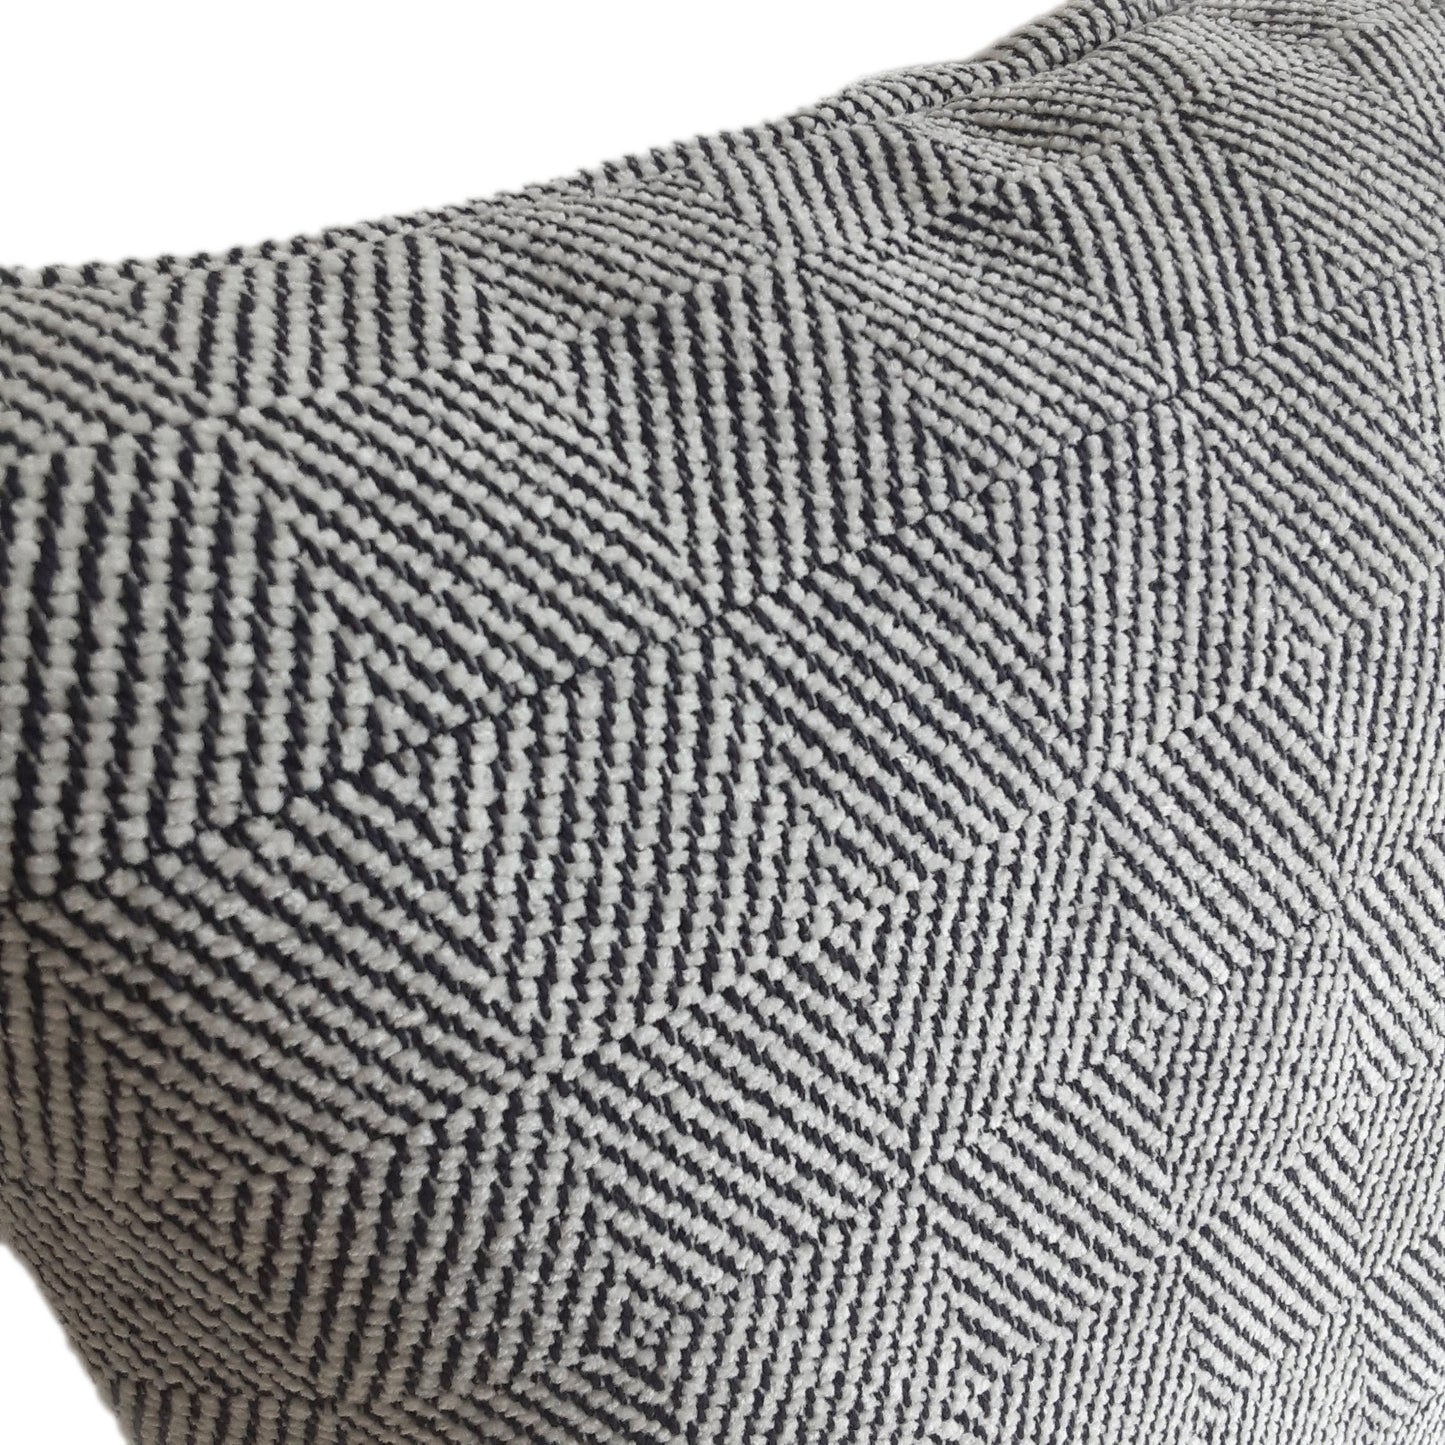 Modern Black and White Pillow Cover in Plush Chenille with Lines and Squares Pattern Design - 18x18  20x20